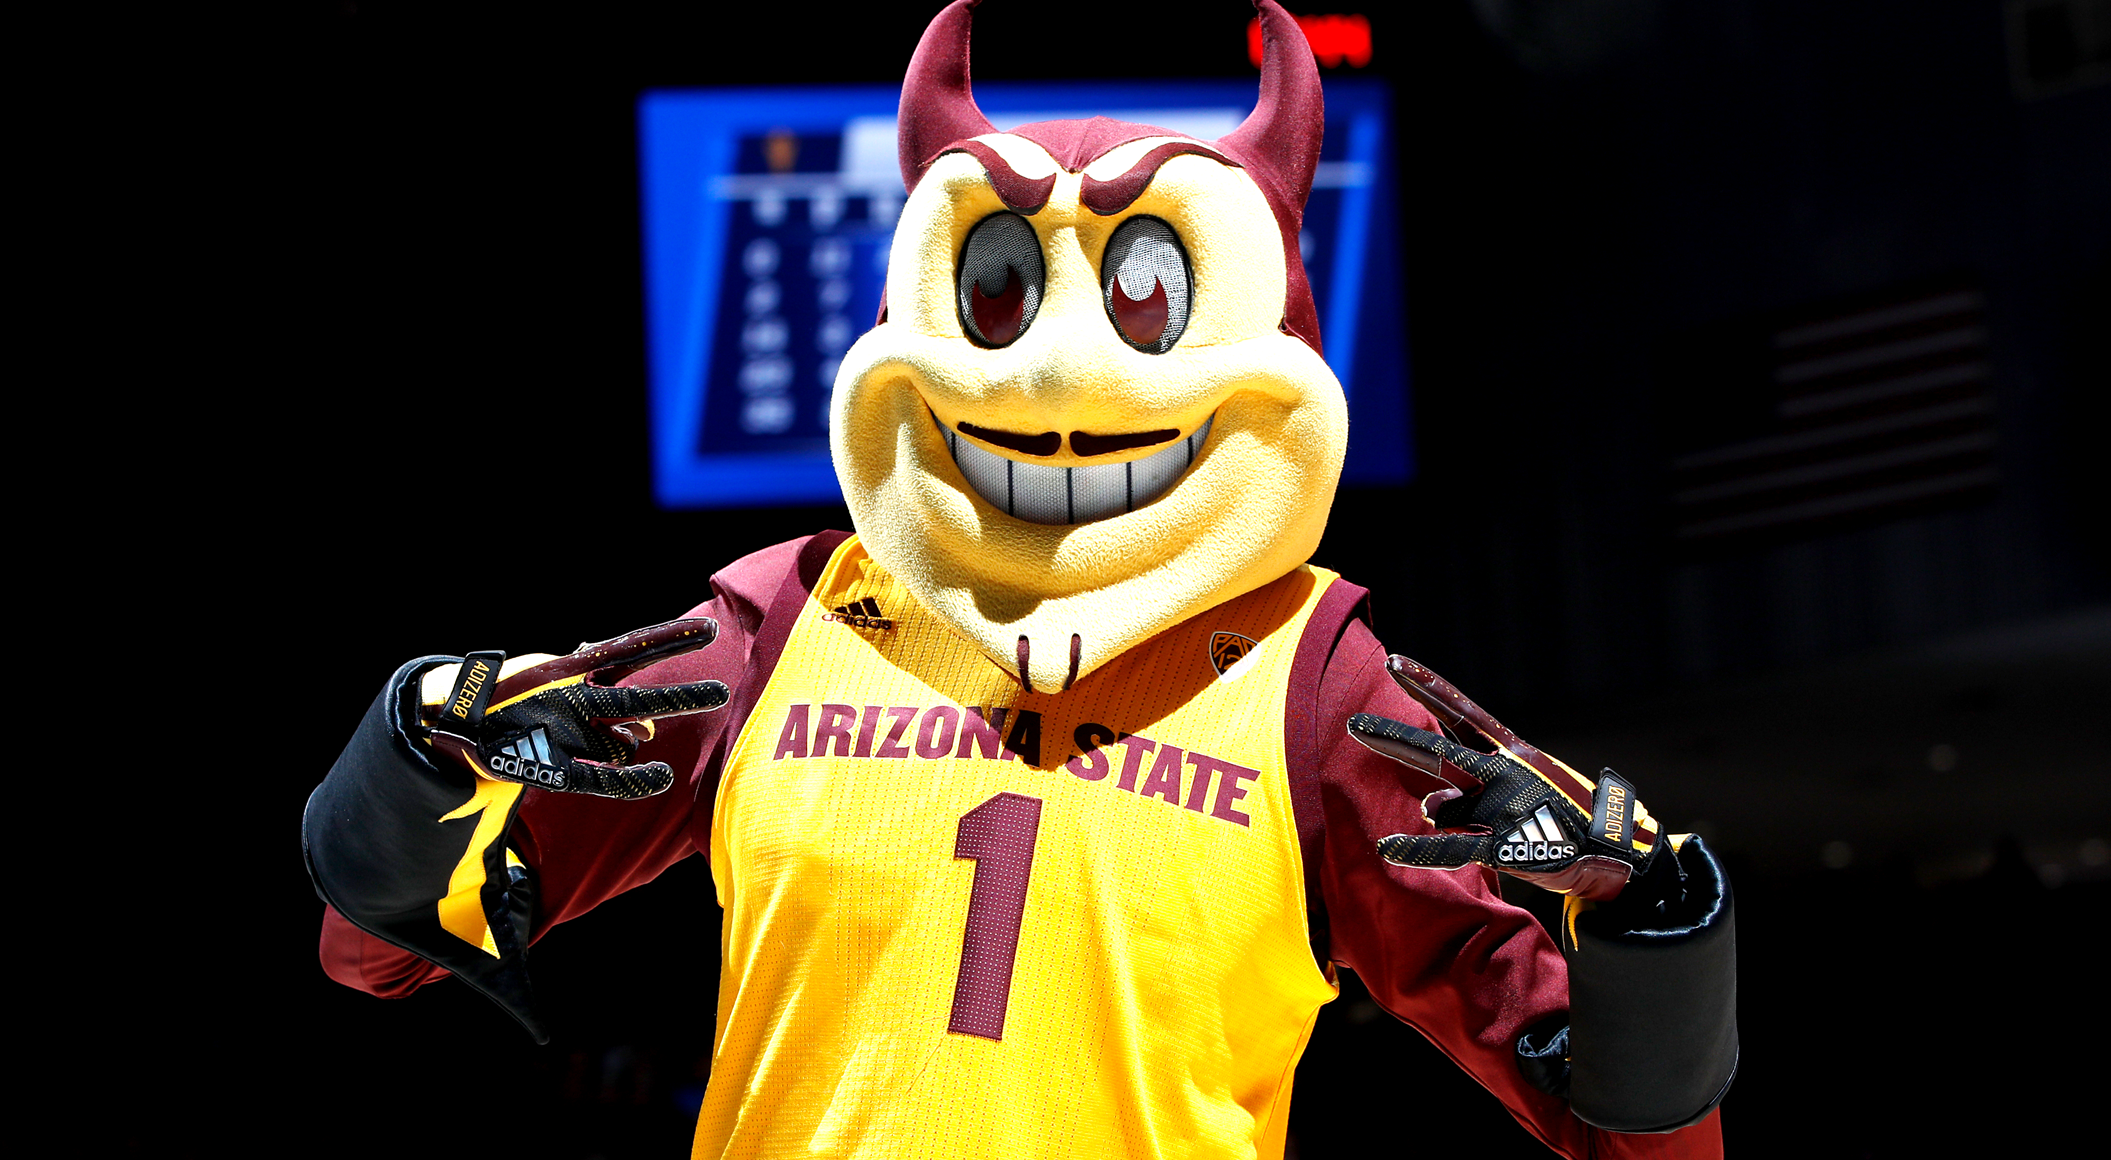 Wait, are the Arizona State Sun Devils rooting for the Capitals in